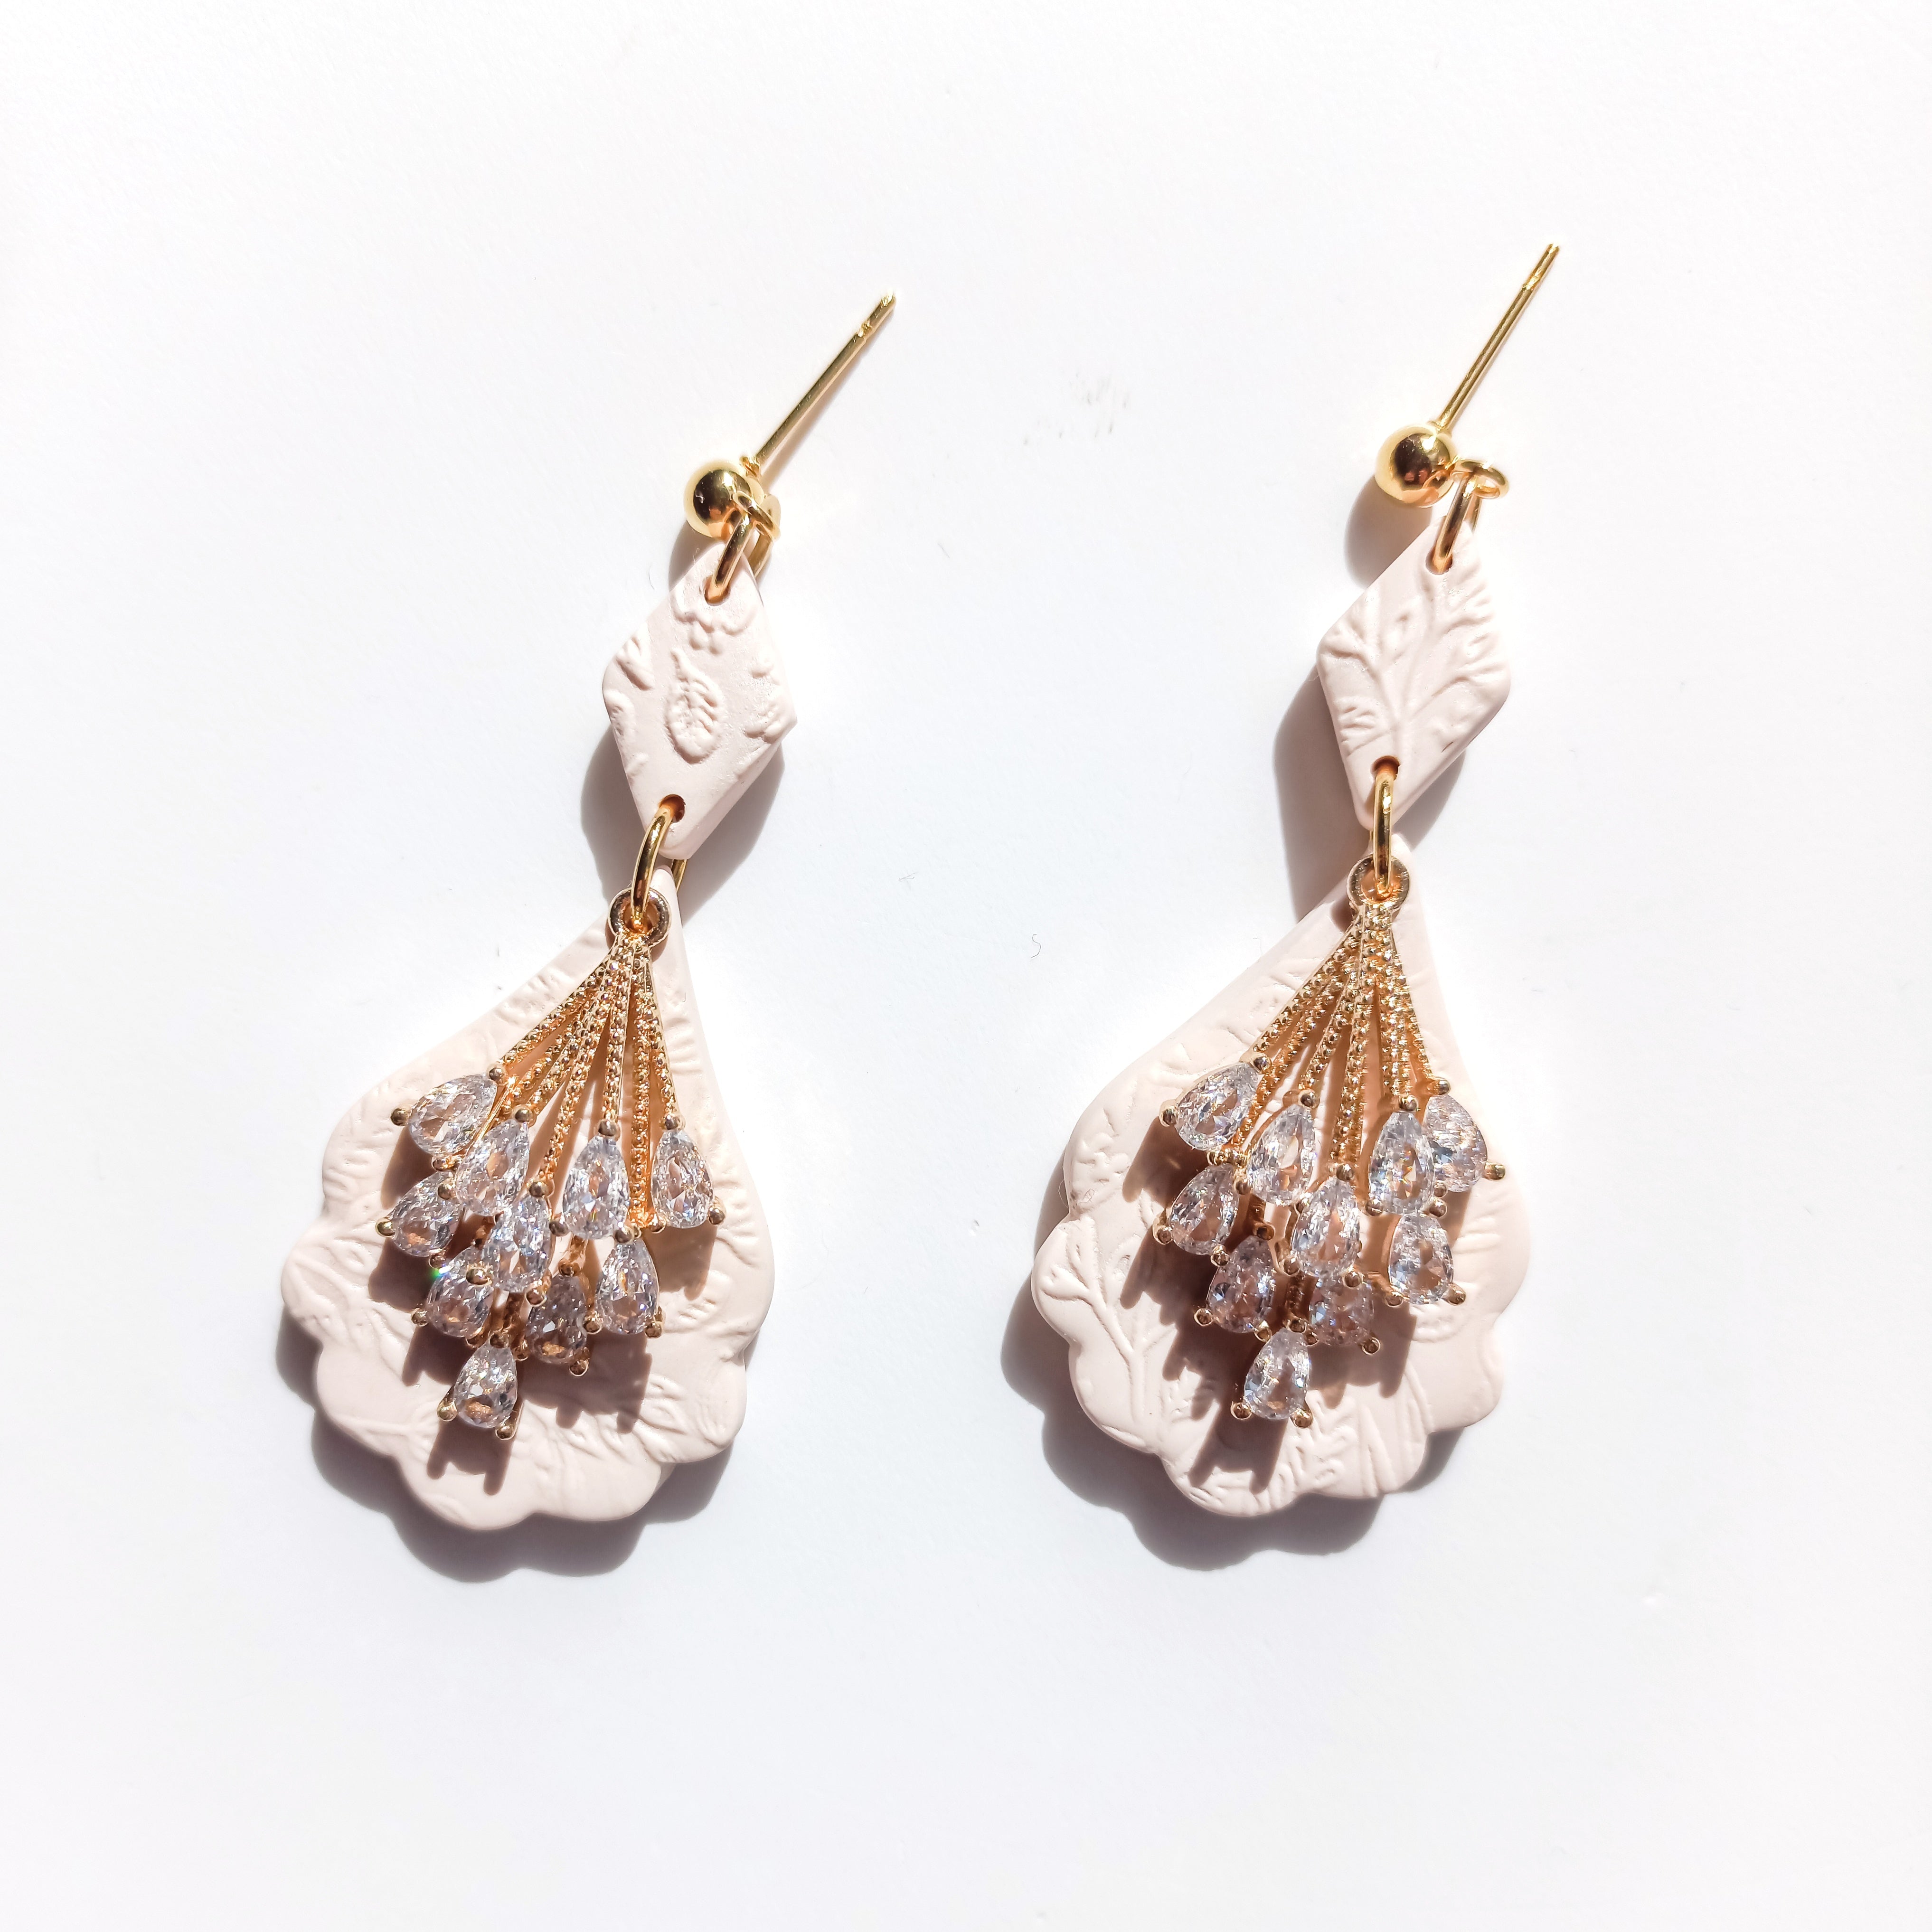 Moon collection: large earrings sterling silver gold plated